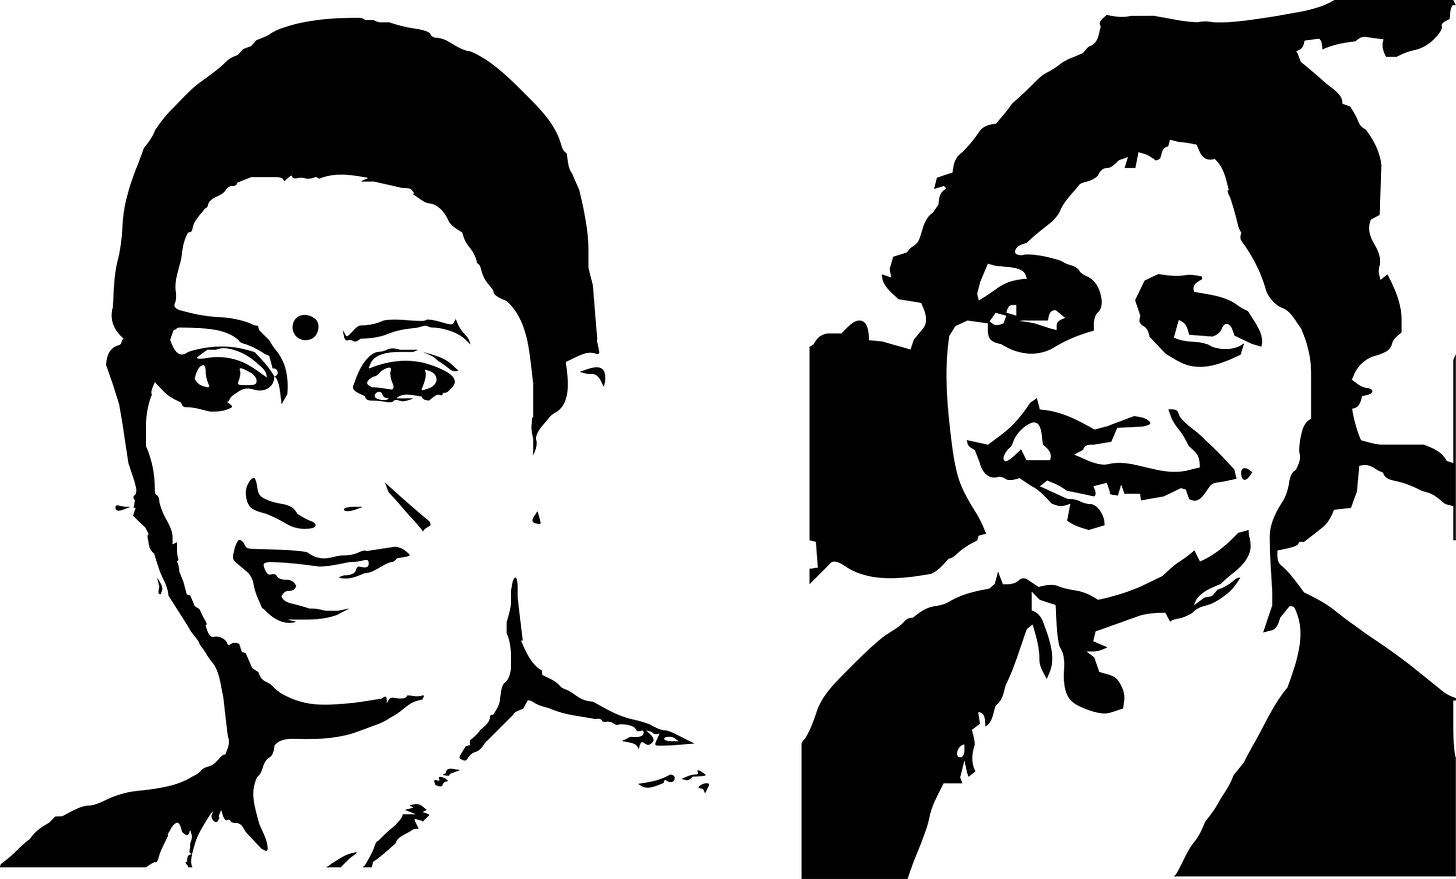 Smriti Irani Exposes Shameless, Dense, and Sold out Sheela Bhatt in an Online Q&A